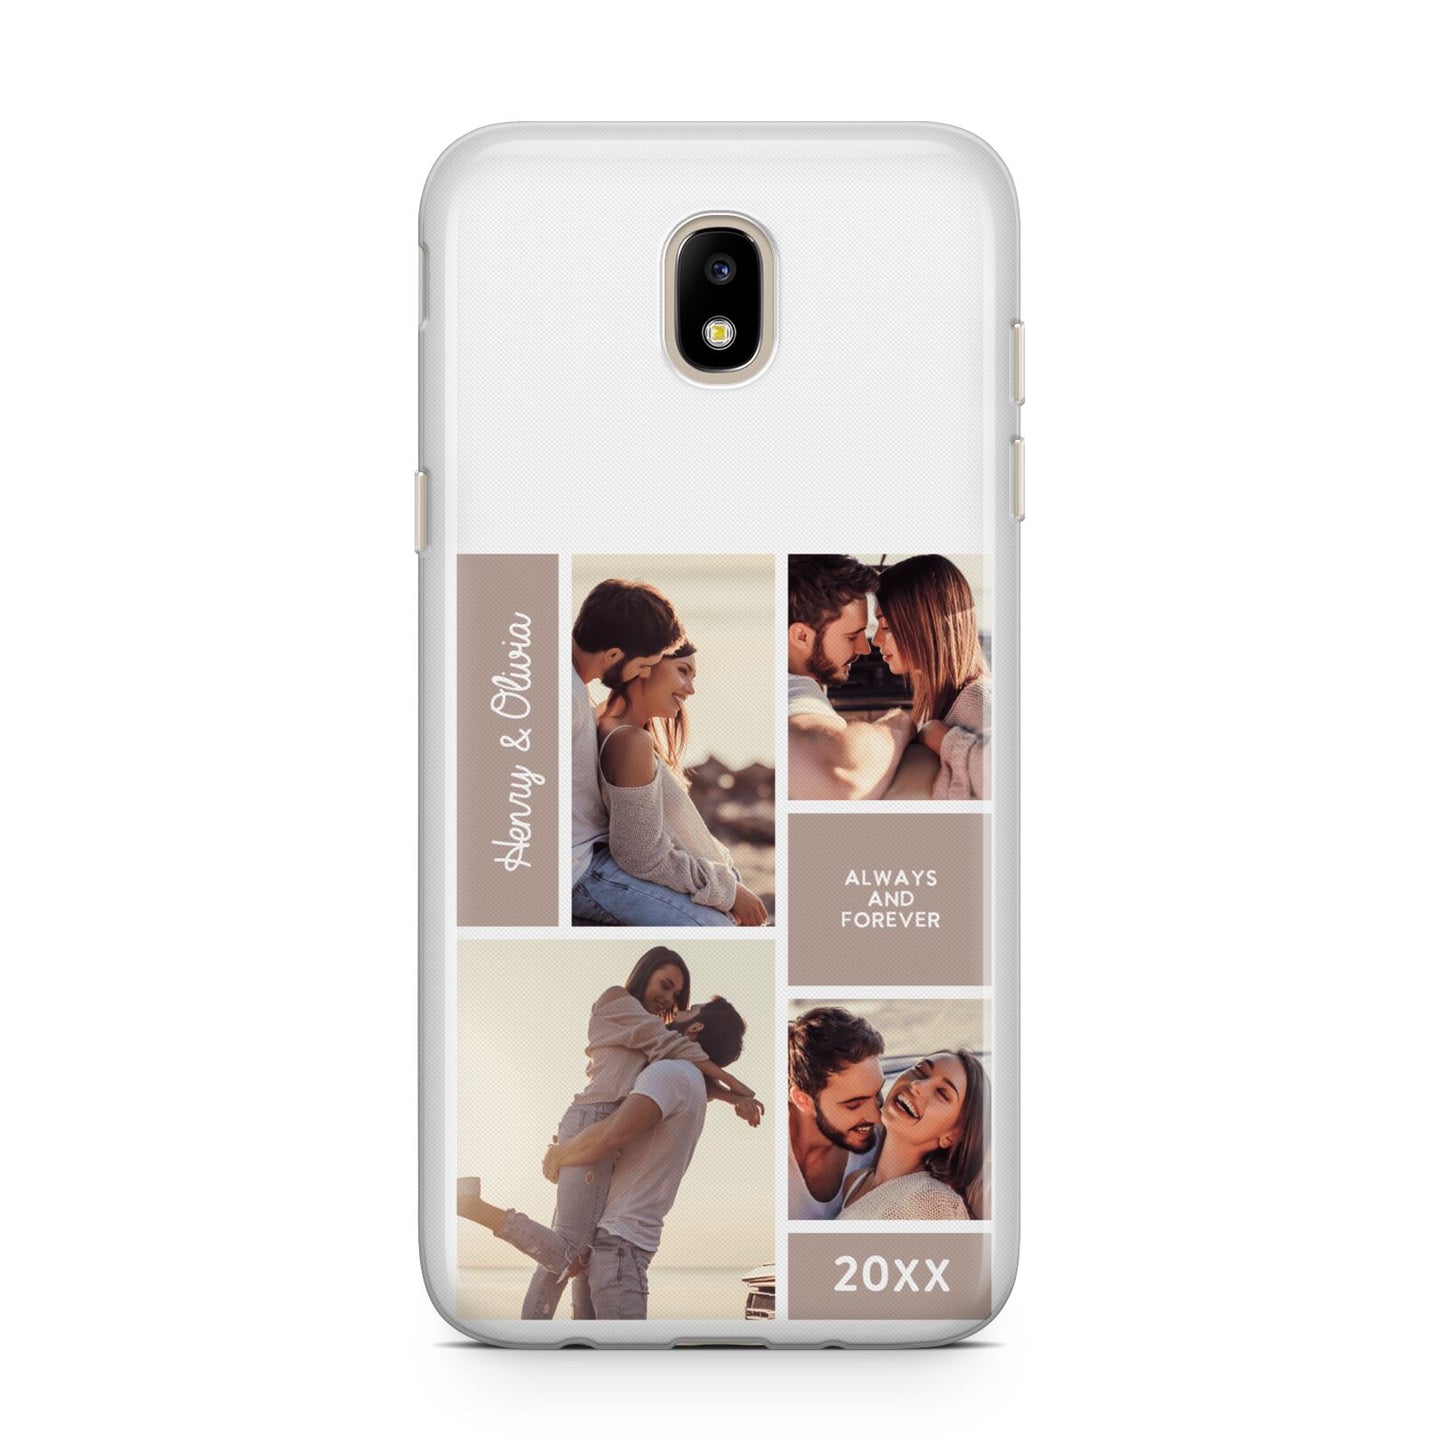 Couples Valentine Photo Collage Personalised Samsung J5 2017 Case